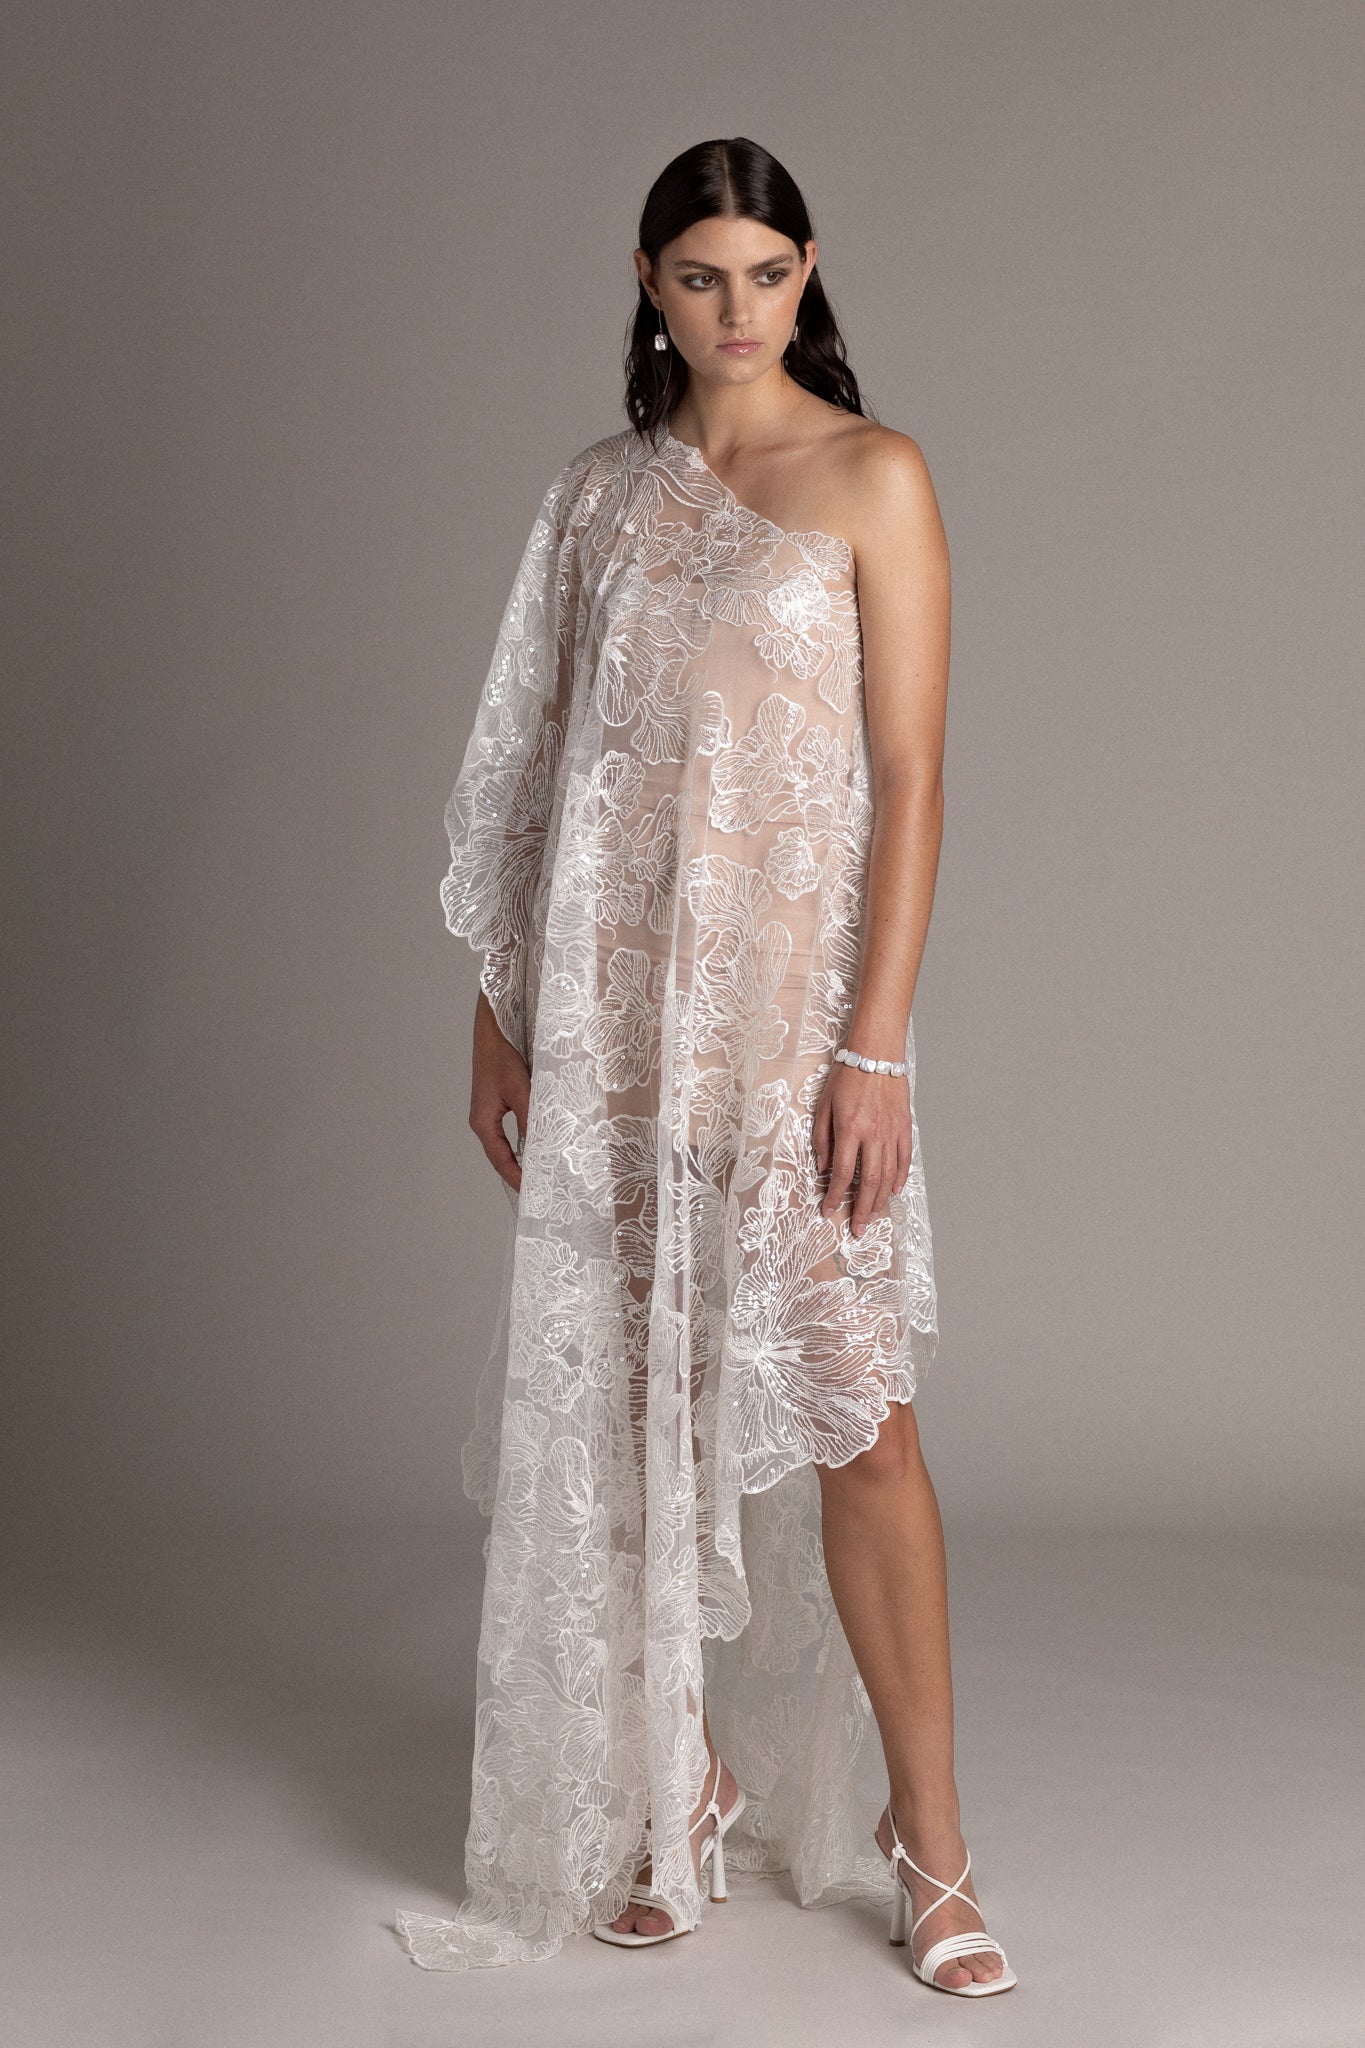 Asymmetric Couture Dress is meticulously crafted for the woman who seeks to make a statement on her wedding day. The asymmetric silhouette creates an artful balance between sophistication and daring. 